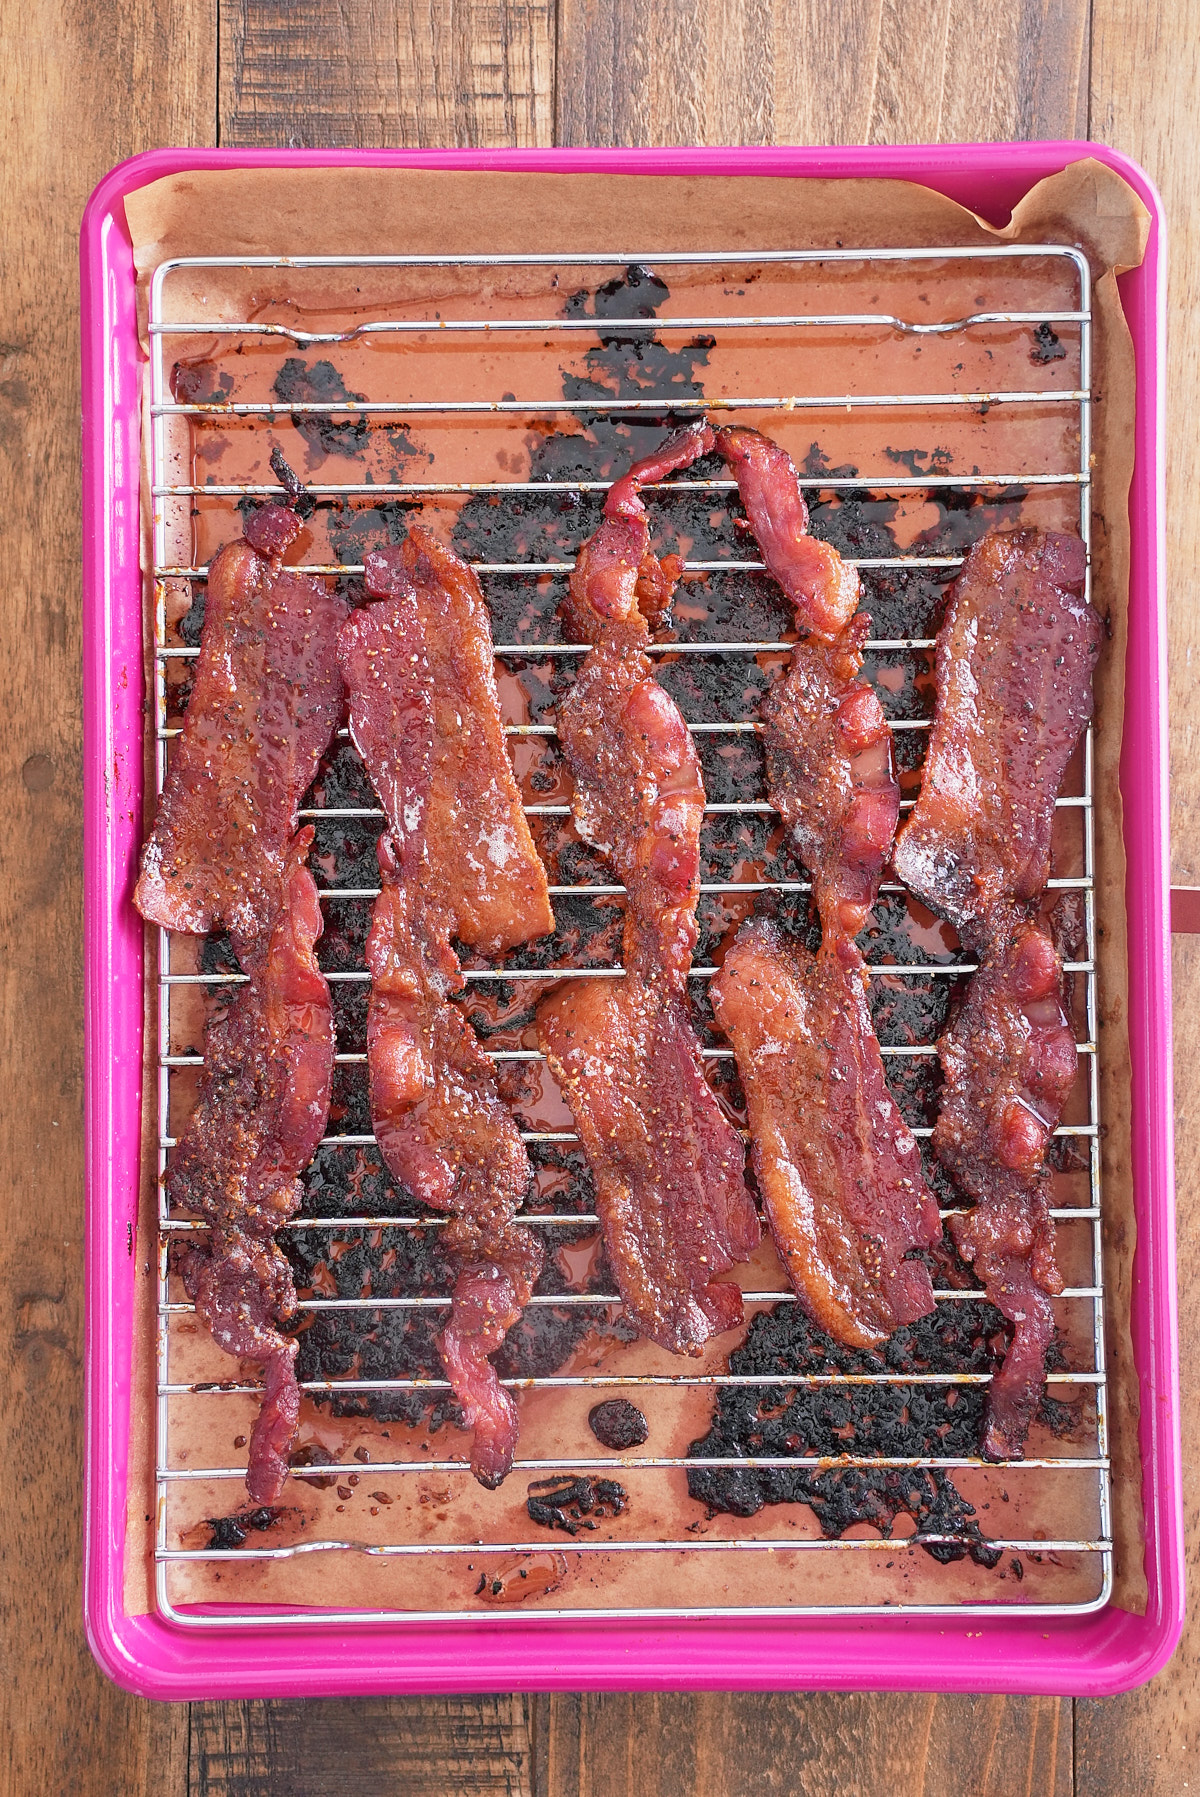 cooked candied bacon after it is removed from the oven and still on the baking rack